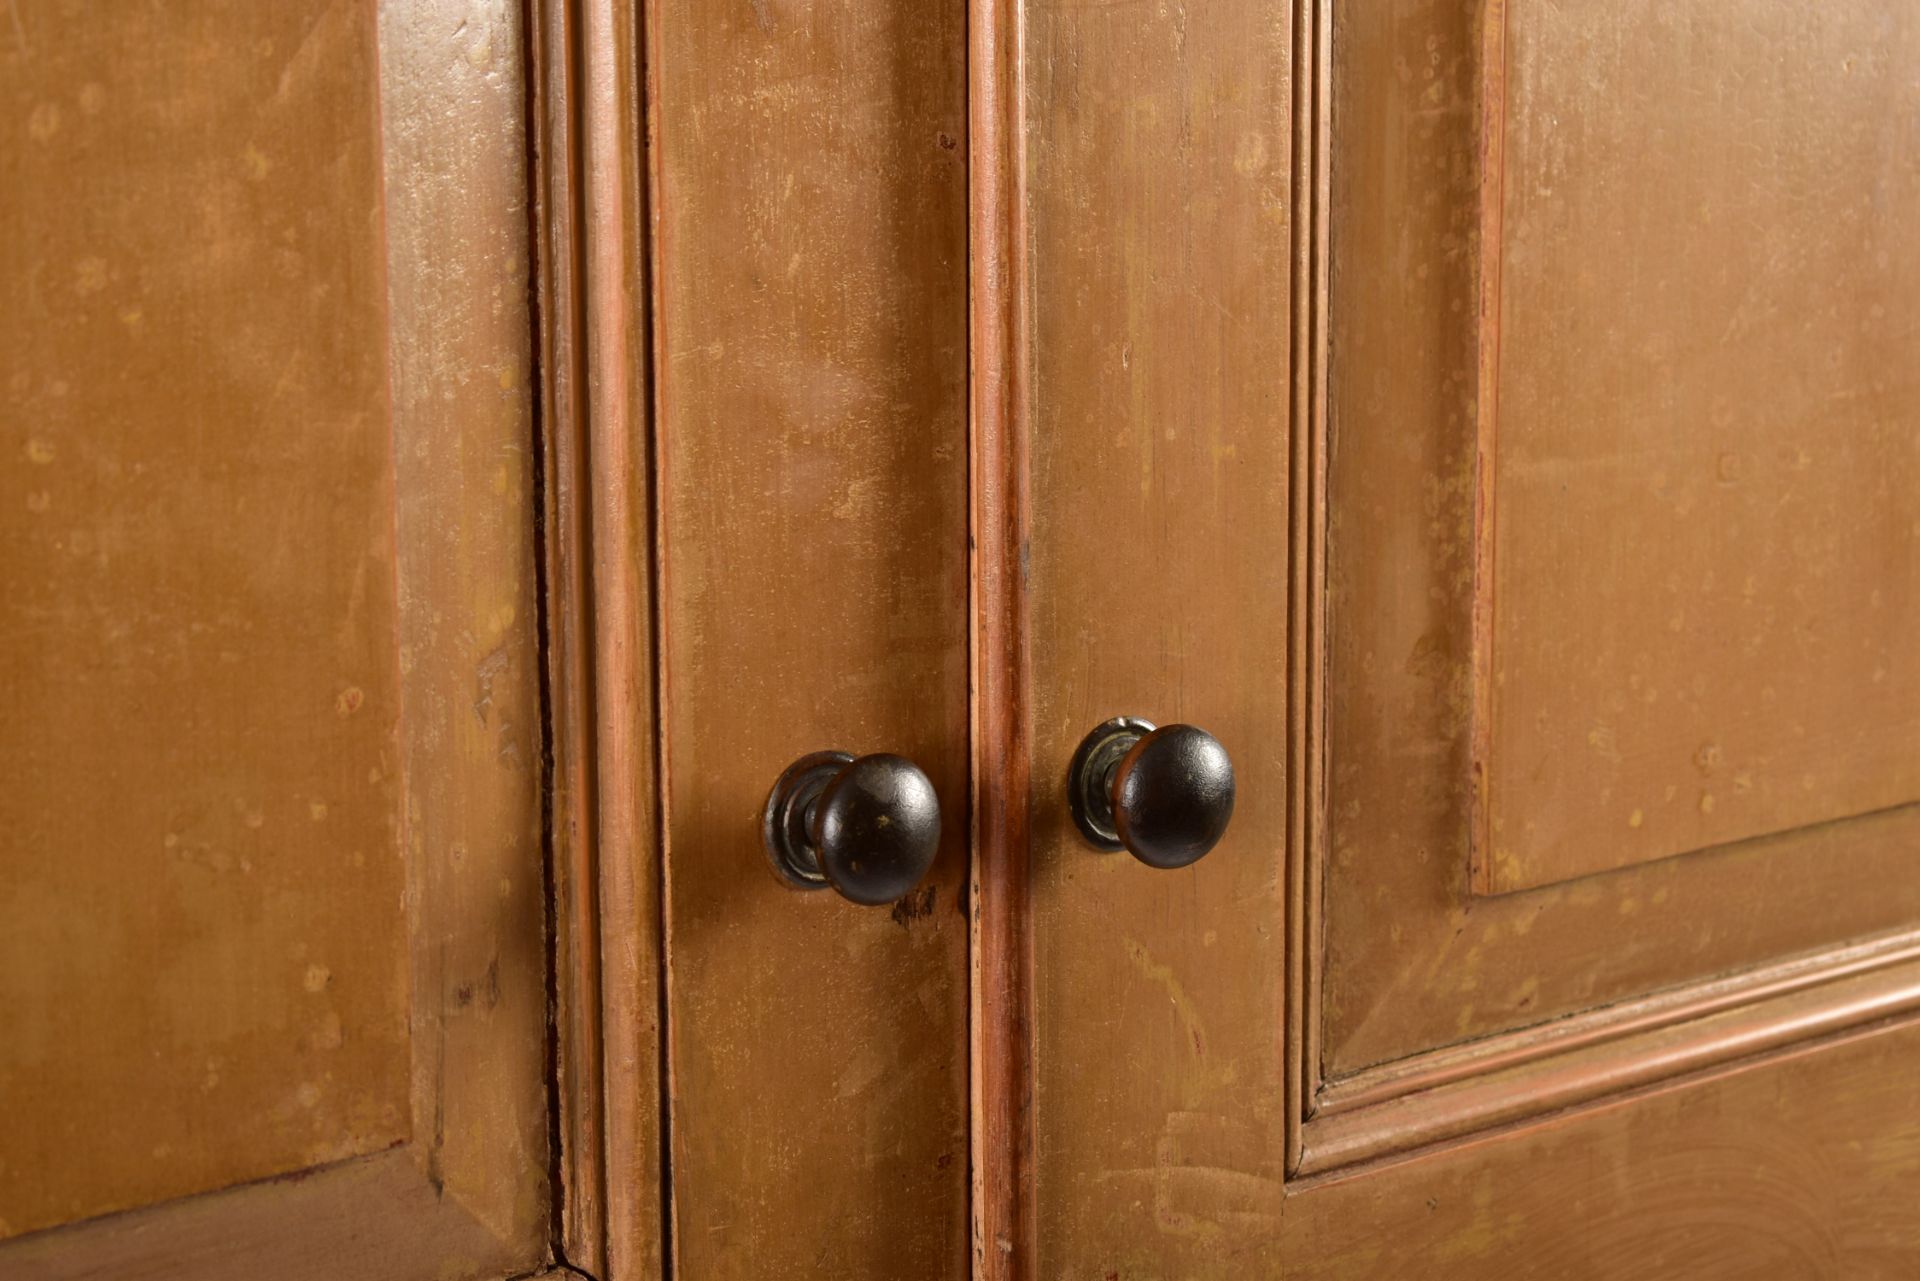 19TH CENTURY FRENCH ARMOIRE HOUSE KEEPERS CUPBOARD - Image 2 of 8